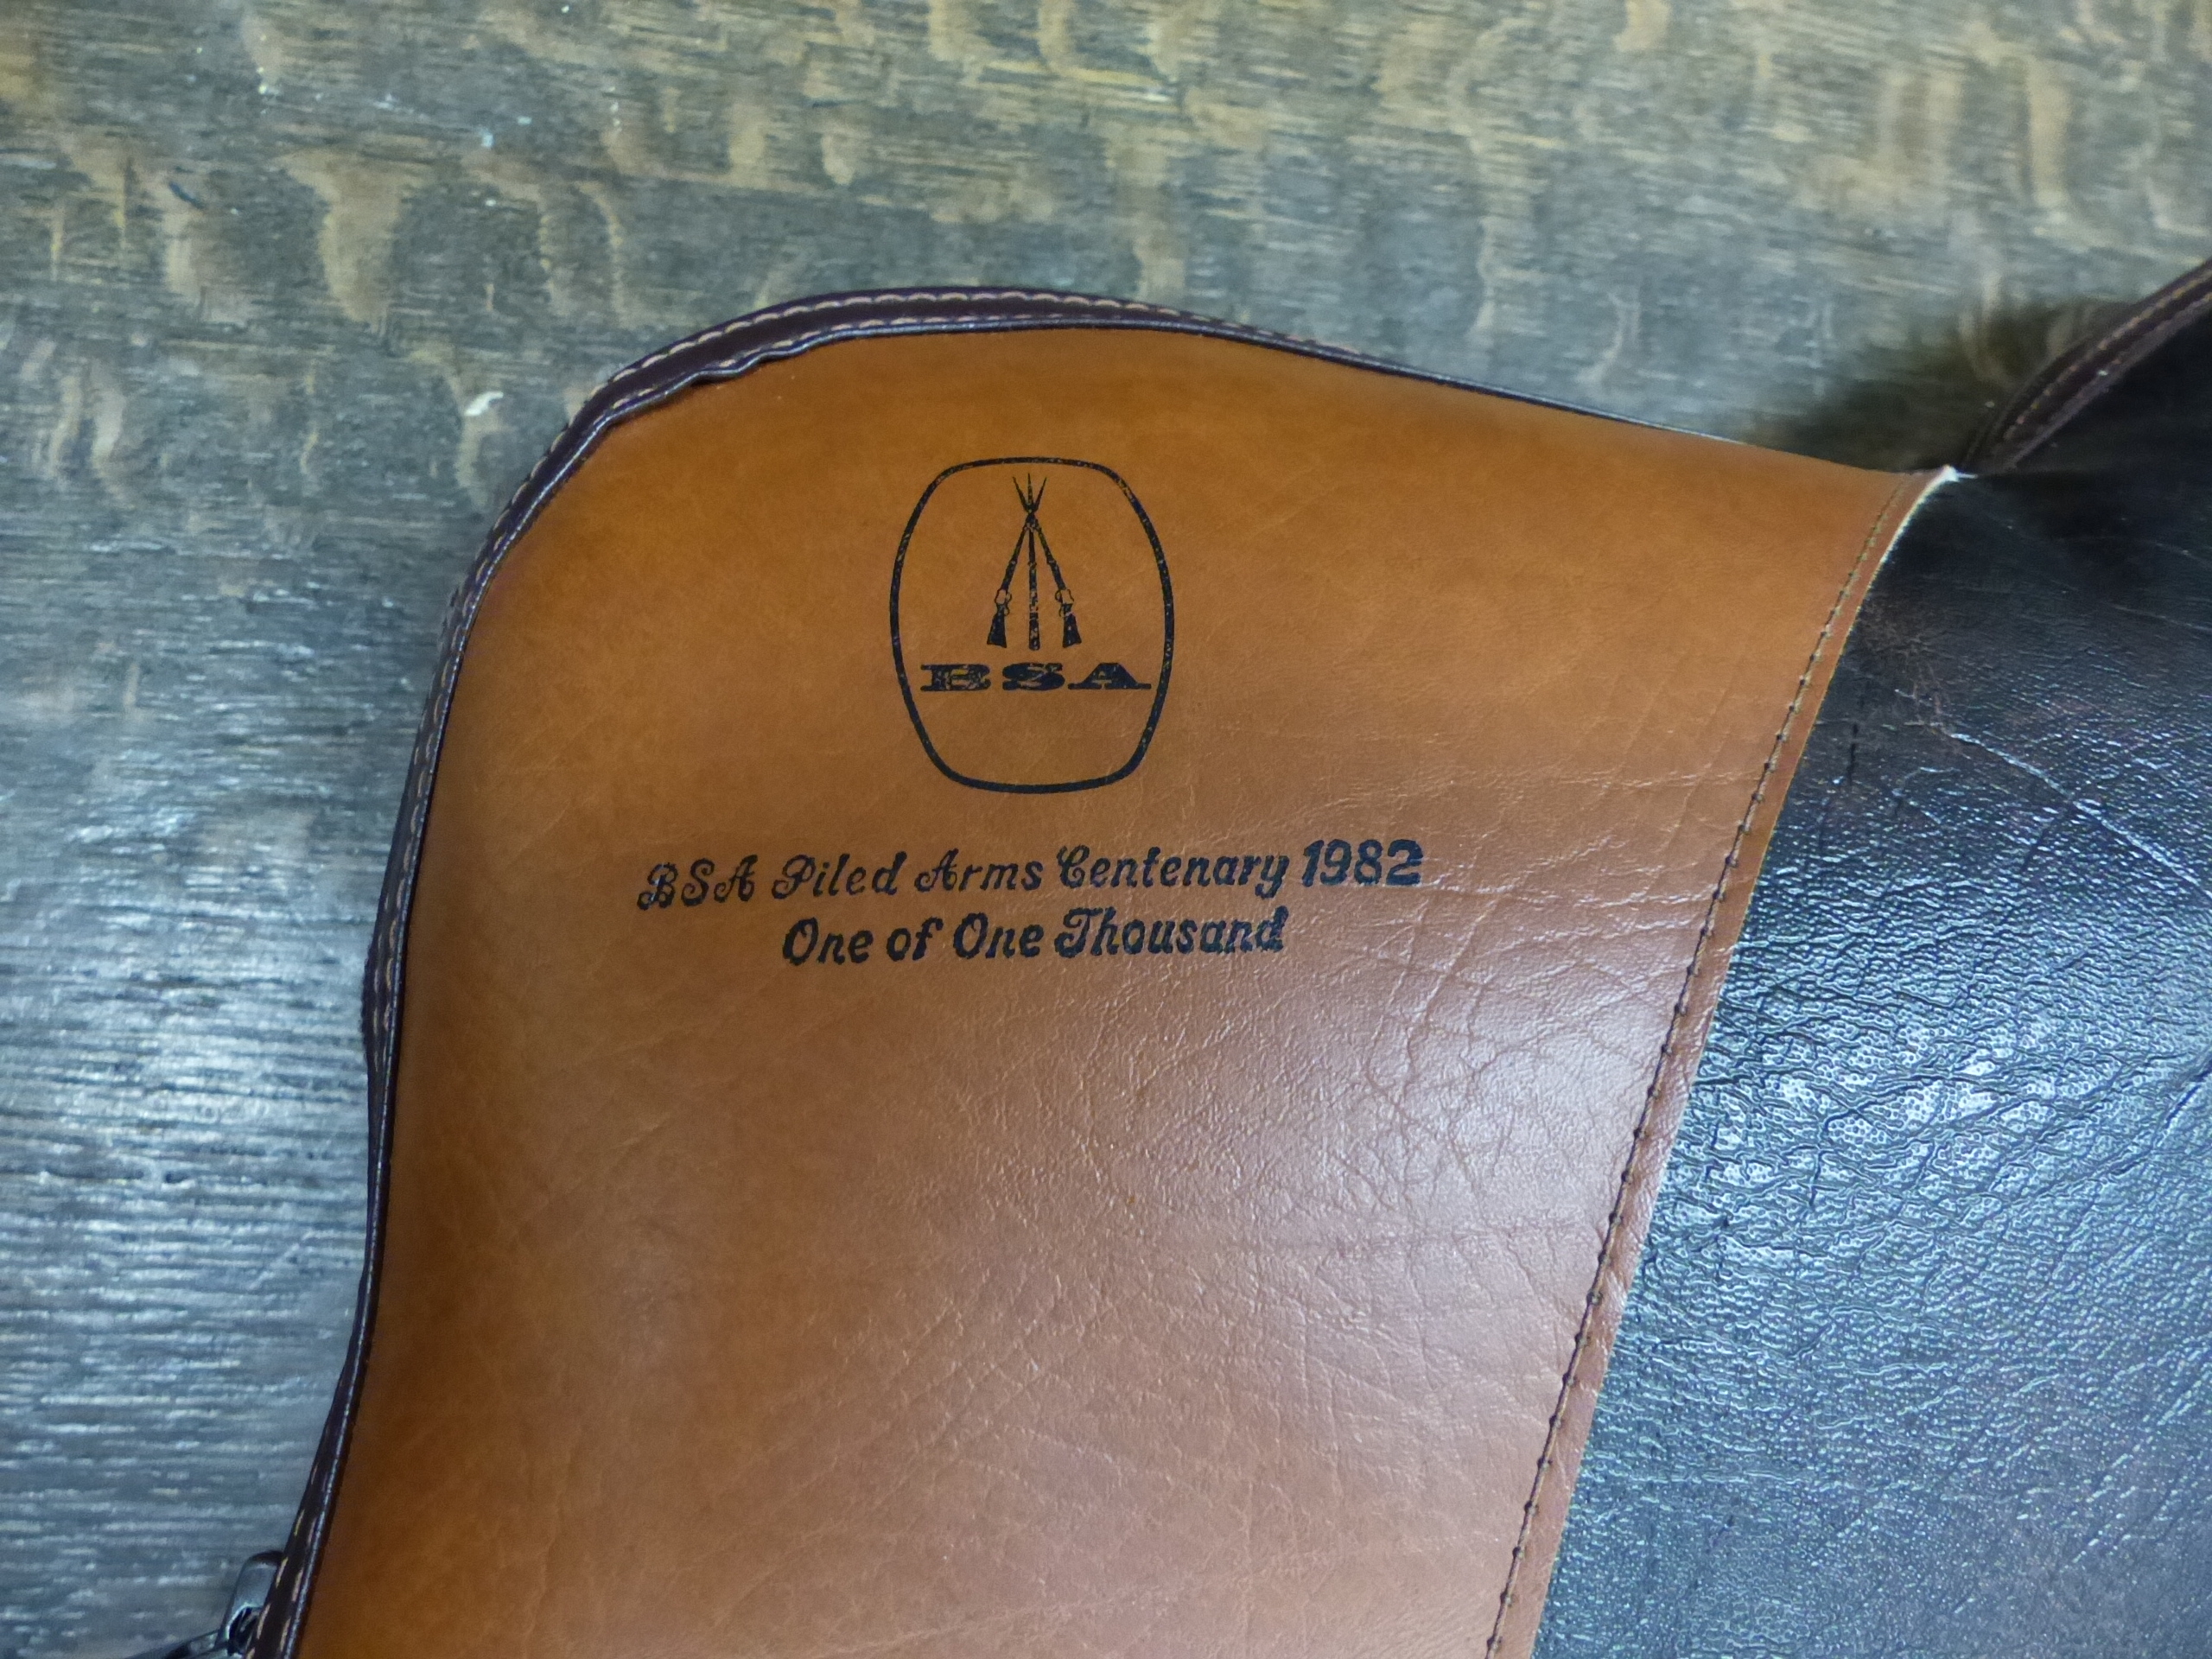 BSA FIELD ARMS, CETENARY 1982 1/1000 AIR RIFLE 0.177 SERIAL No.CO215 WITH LEATHER CASE, STRAP AND - Image 9 of 9